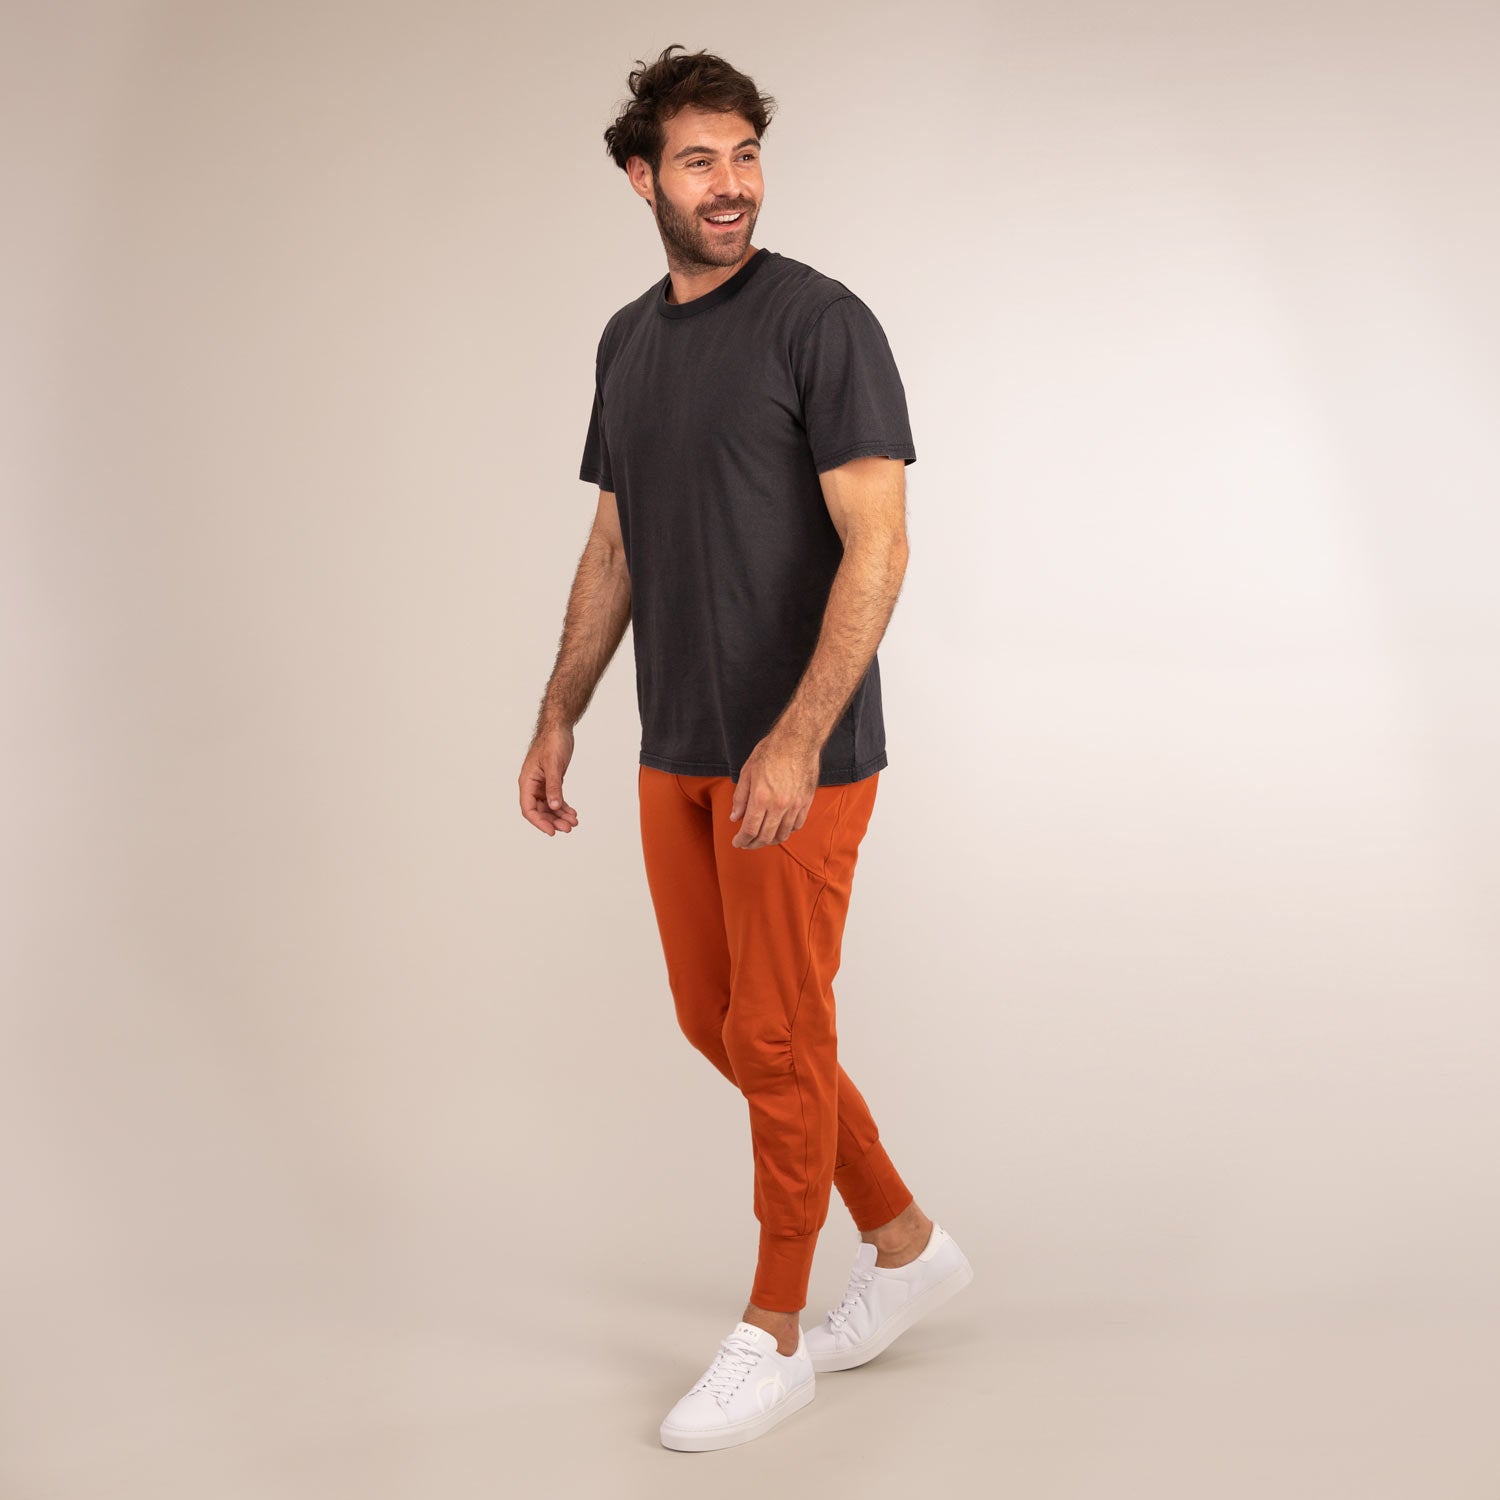 BATABOOM Brushed | Unisex Organic Sweatpants | 3RD ROCK Clothing - Oliver is 6ft 2" with a 34" waist, 40" hips and wears a 34/LL M